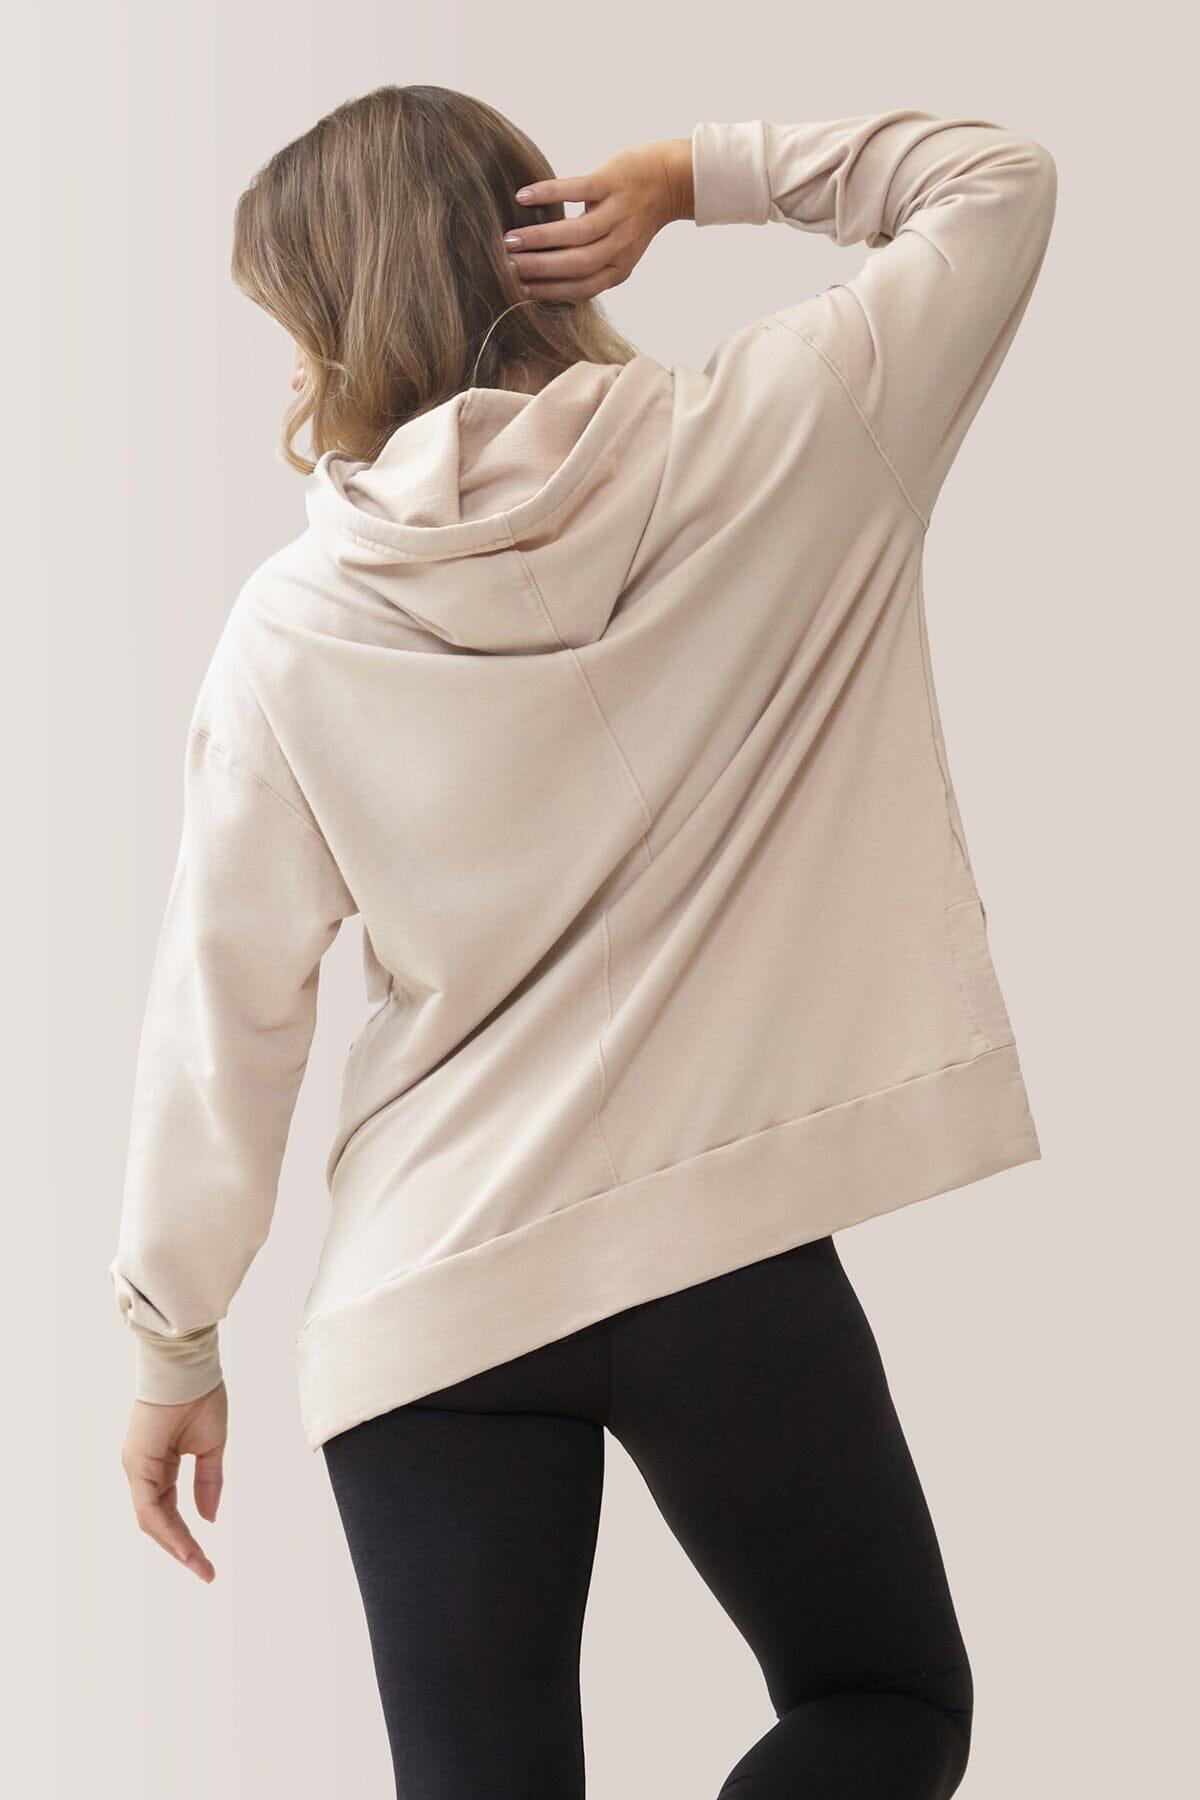 Femme qui porte le chandail Chill out de Rose Boreal./ Women wearing the Chill Out Hoodie by Rose Boreal. -Sand Beige